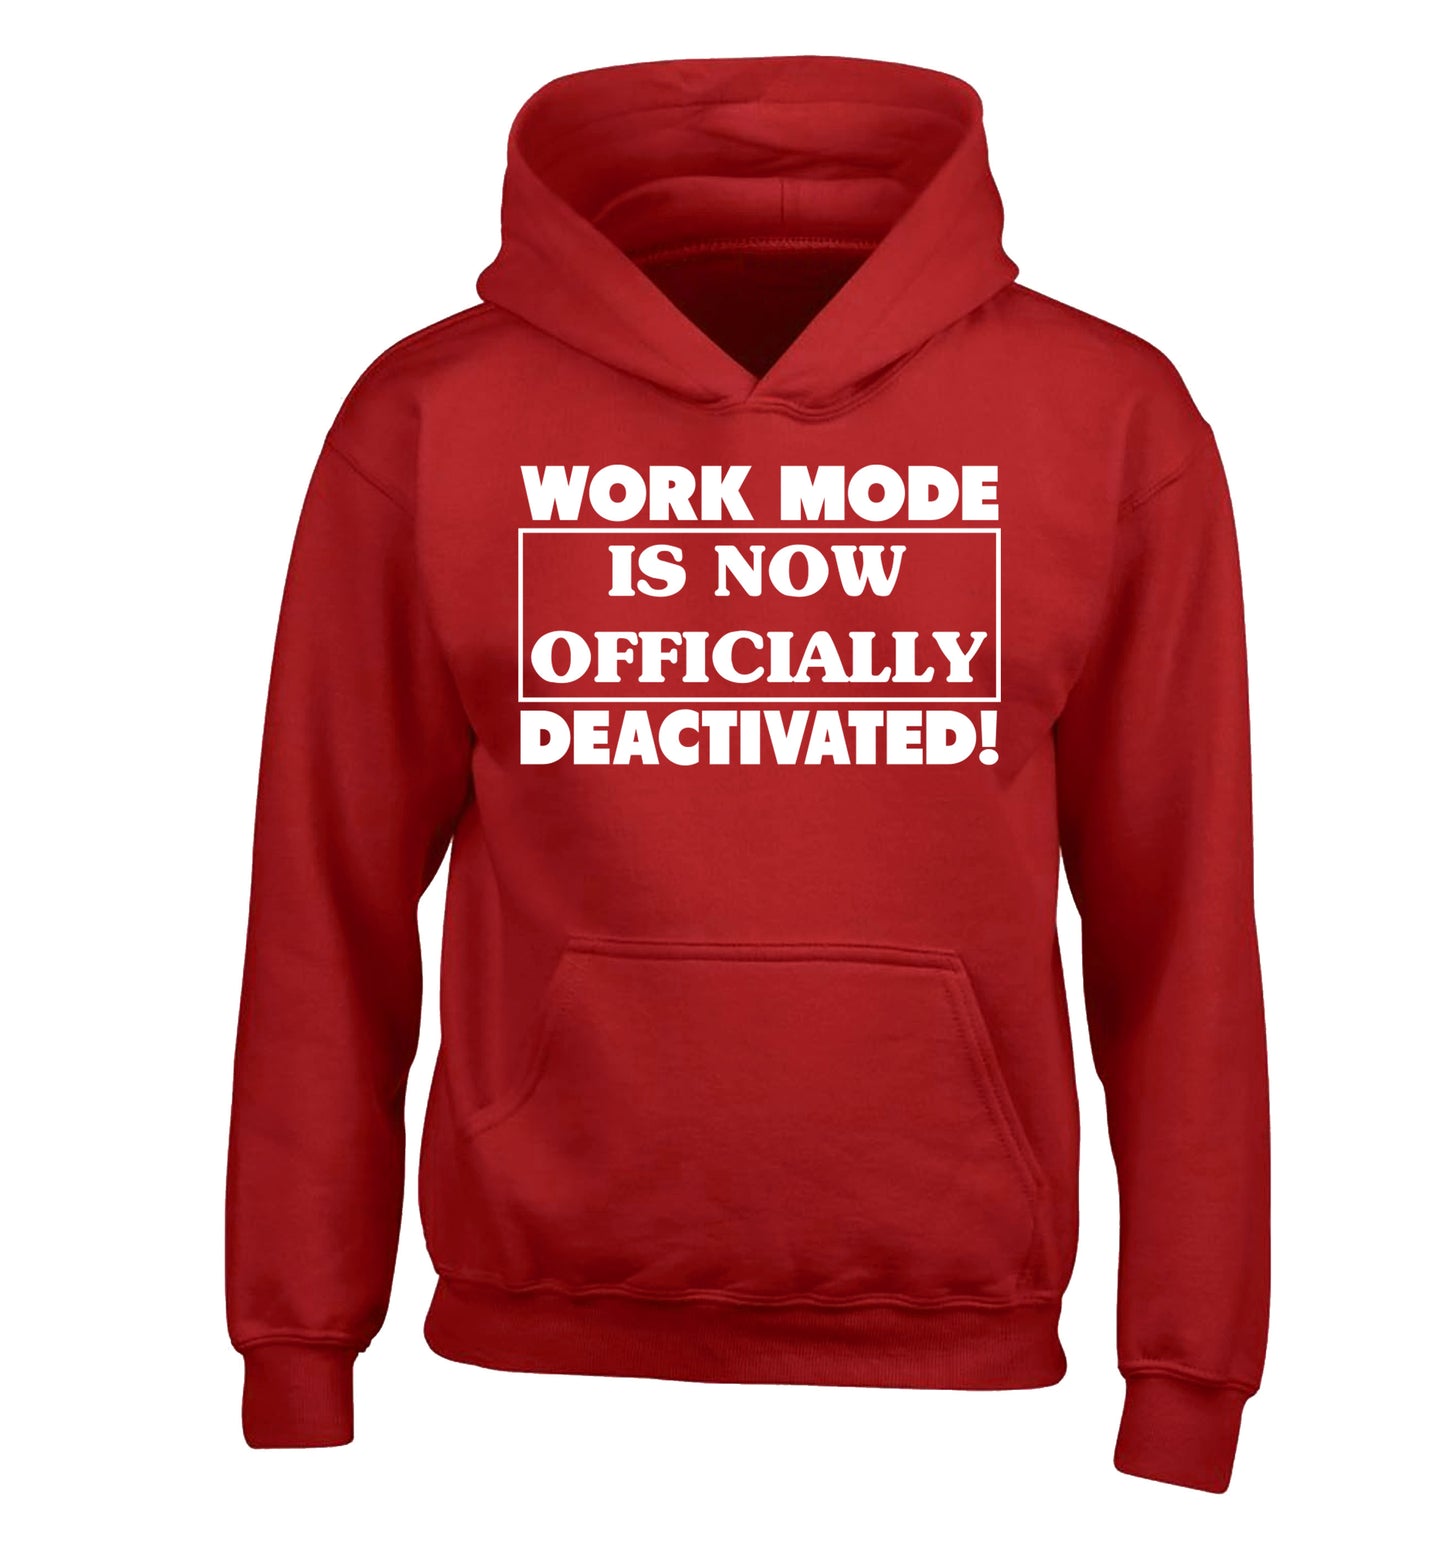 Work mode is now officially deactivated children's red hoodie 12-13 Years